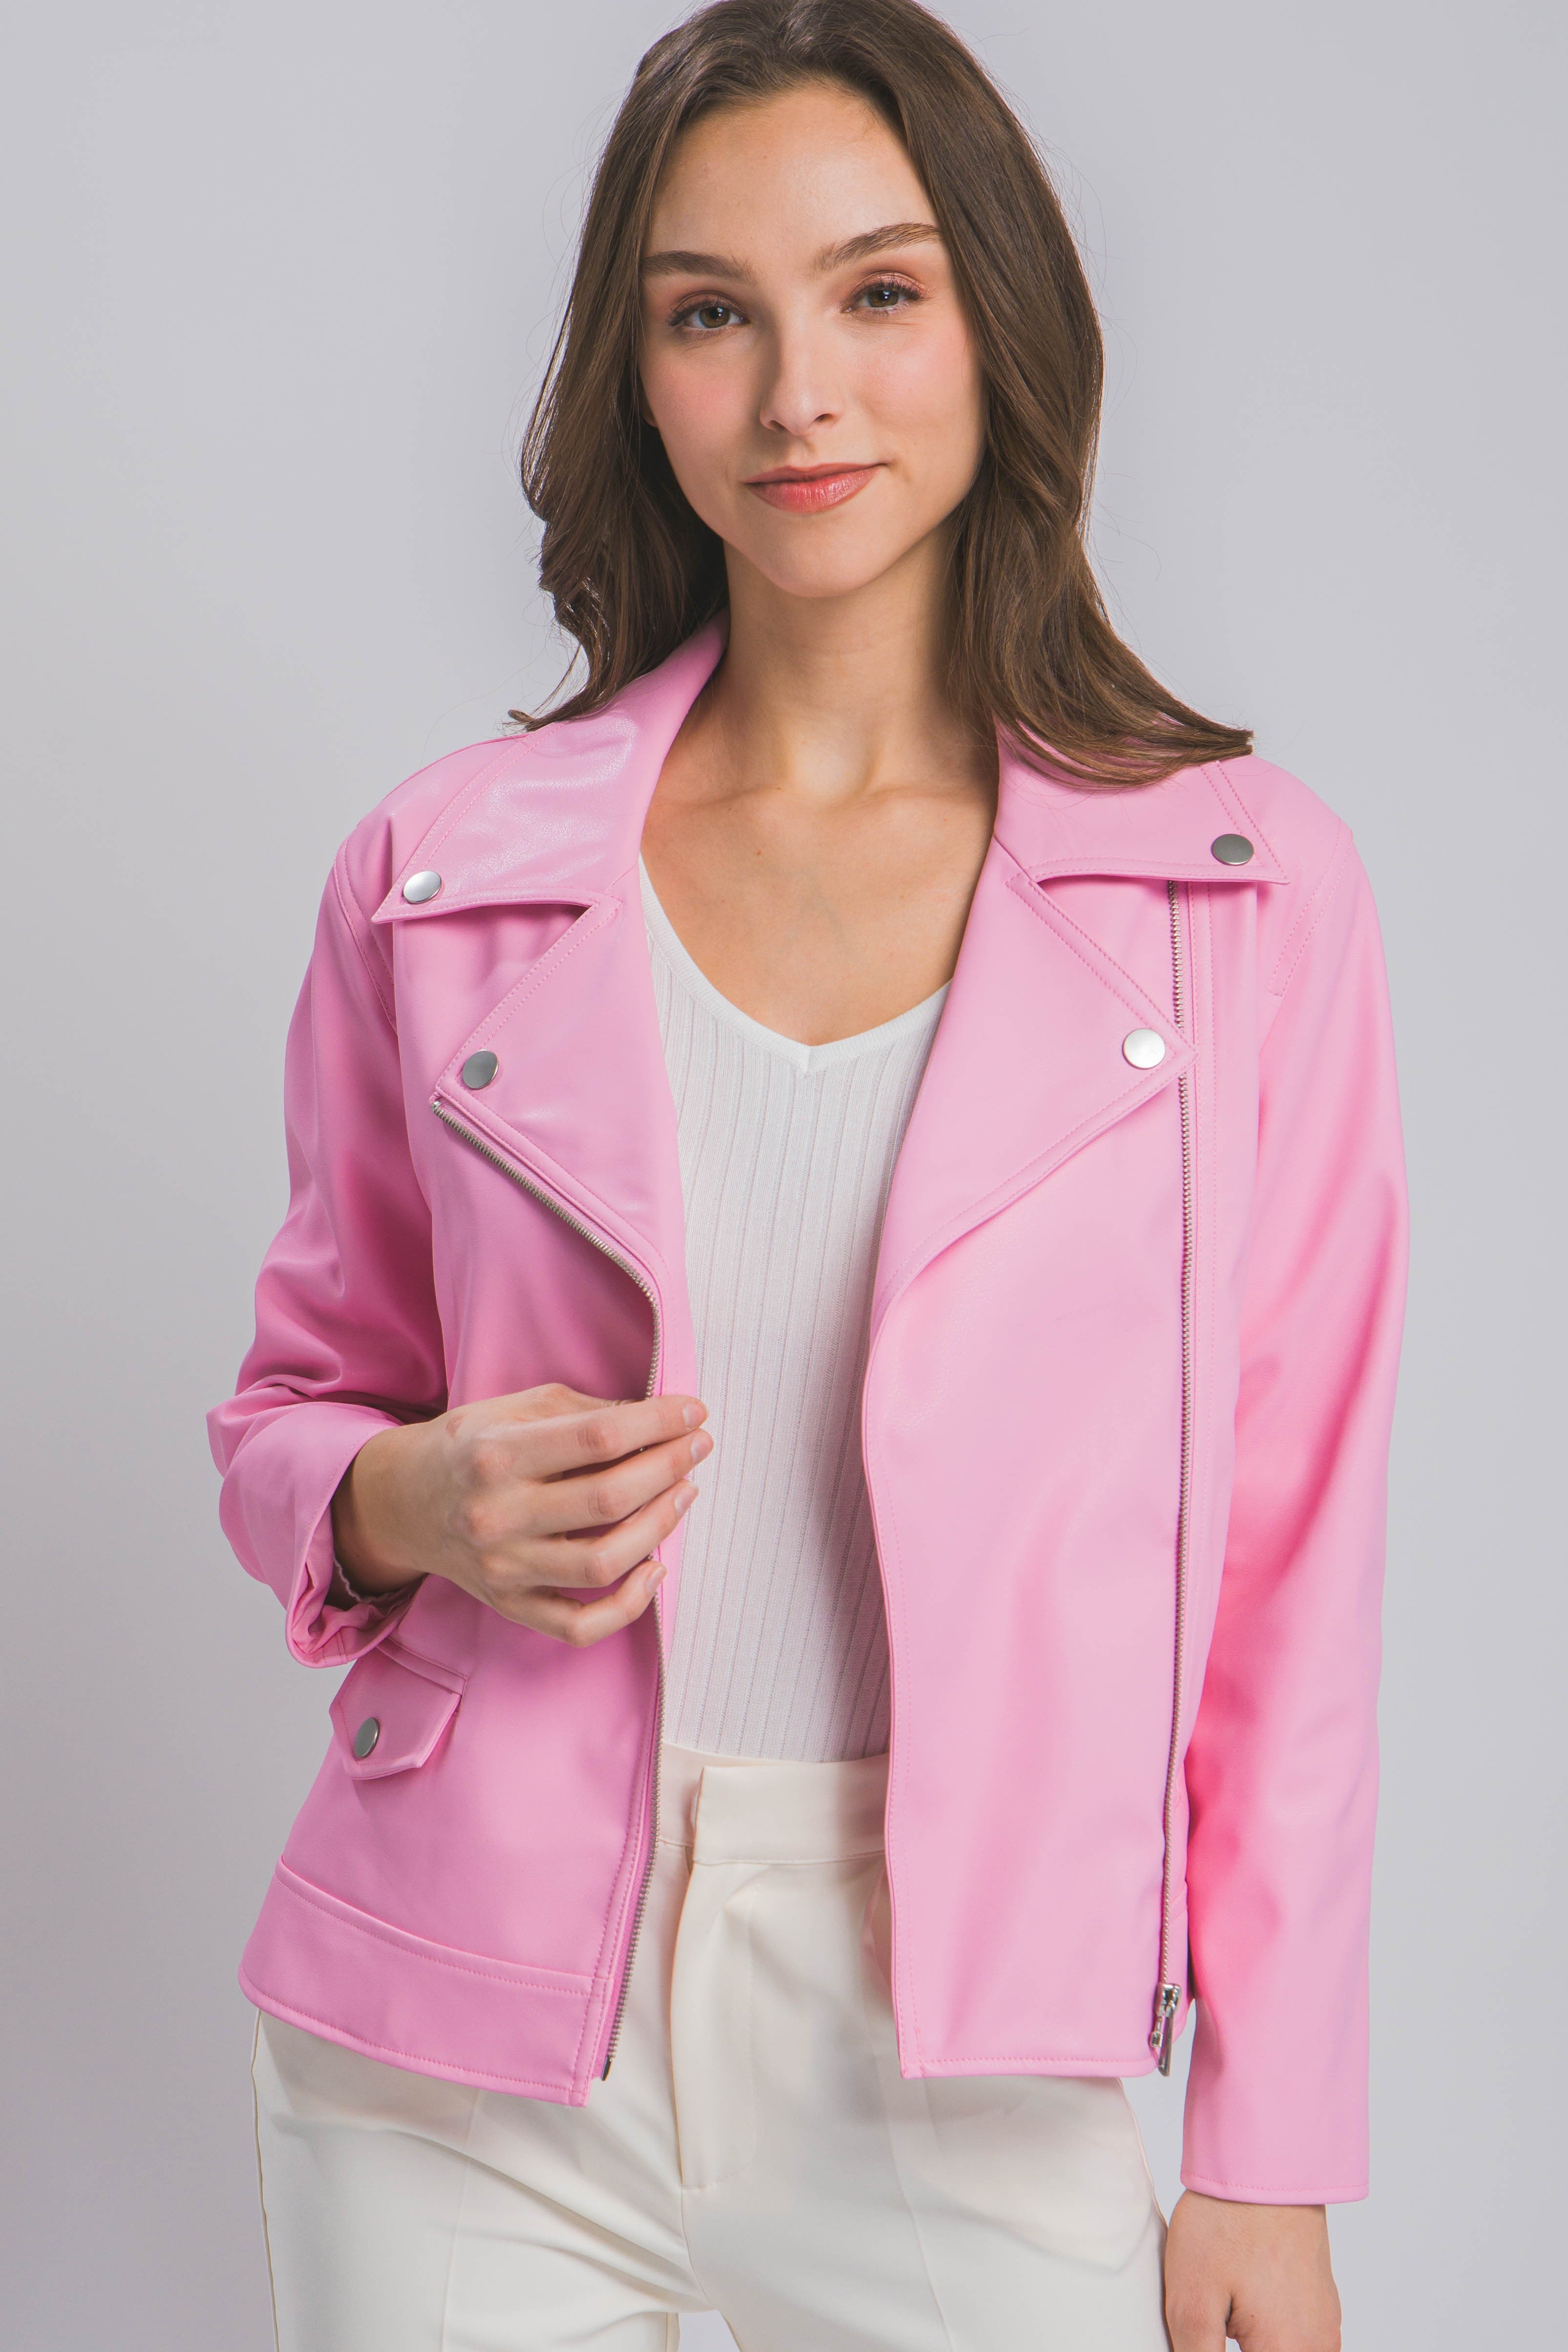 Off The Edge Jacket- 2 Colors